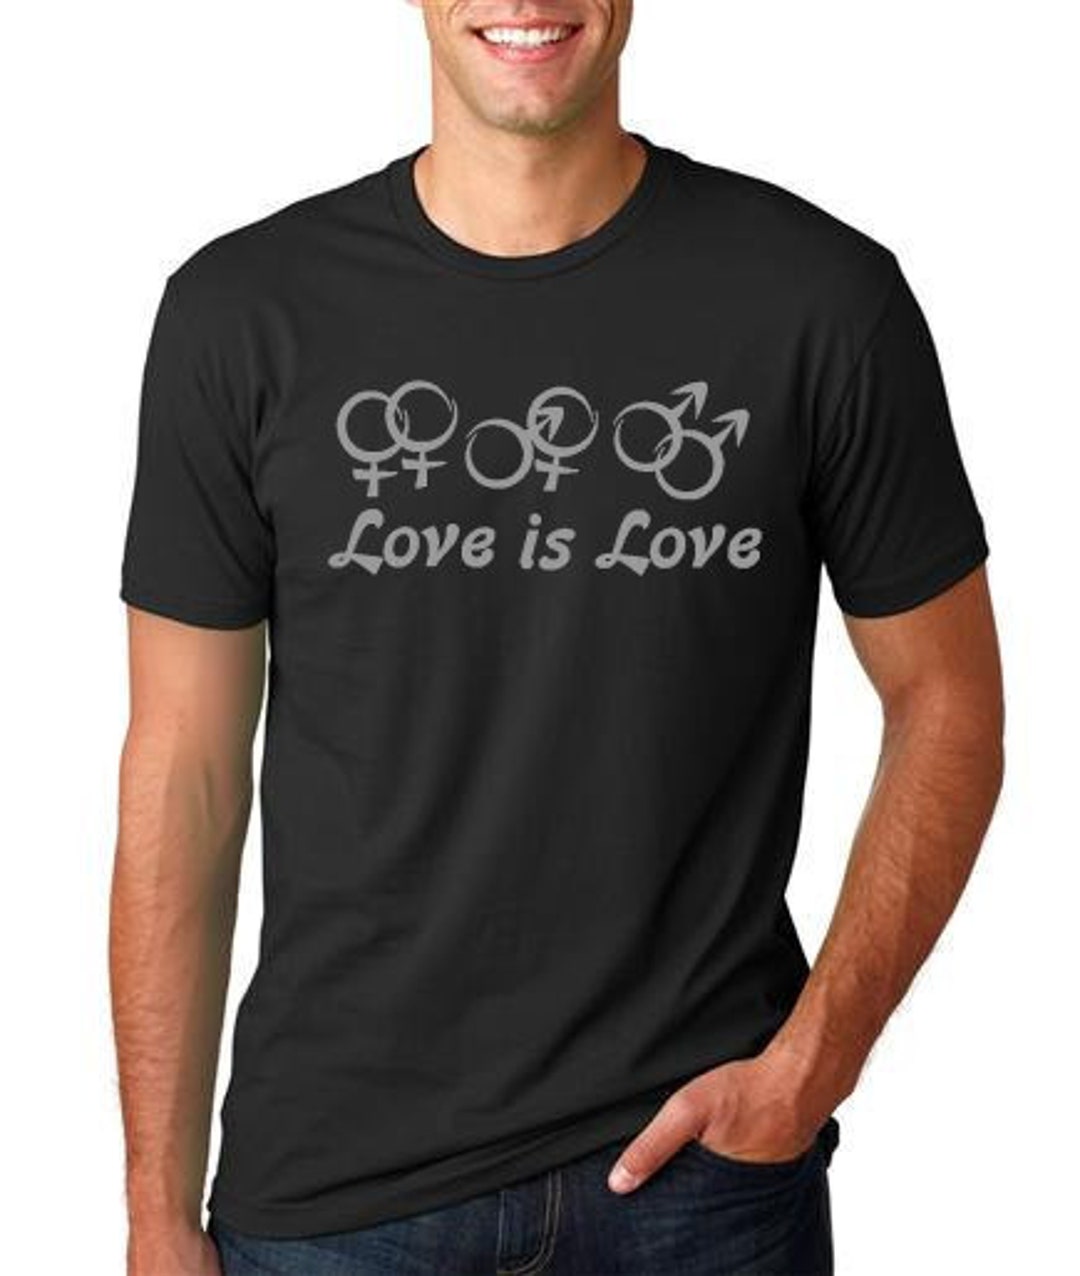 is Love T-shirt Soft Style Love Respect Gay Pride - Etsy